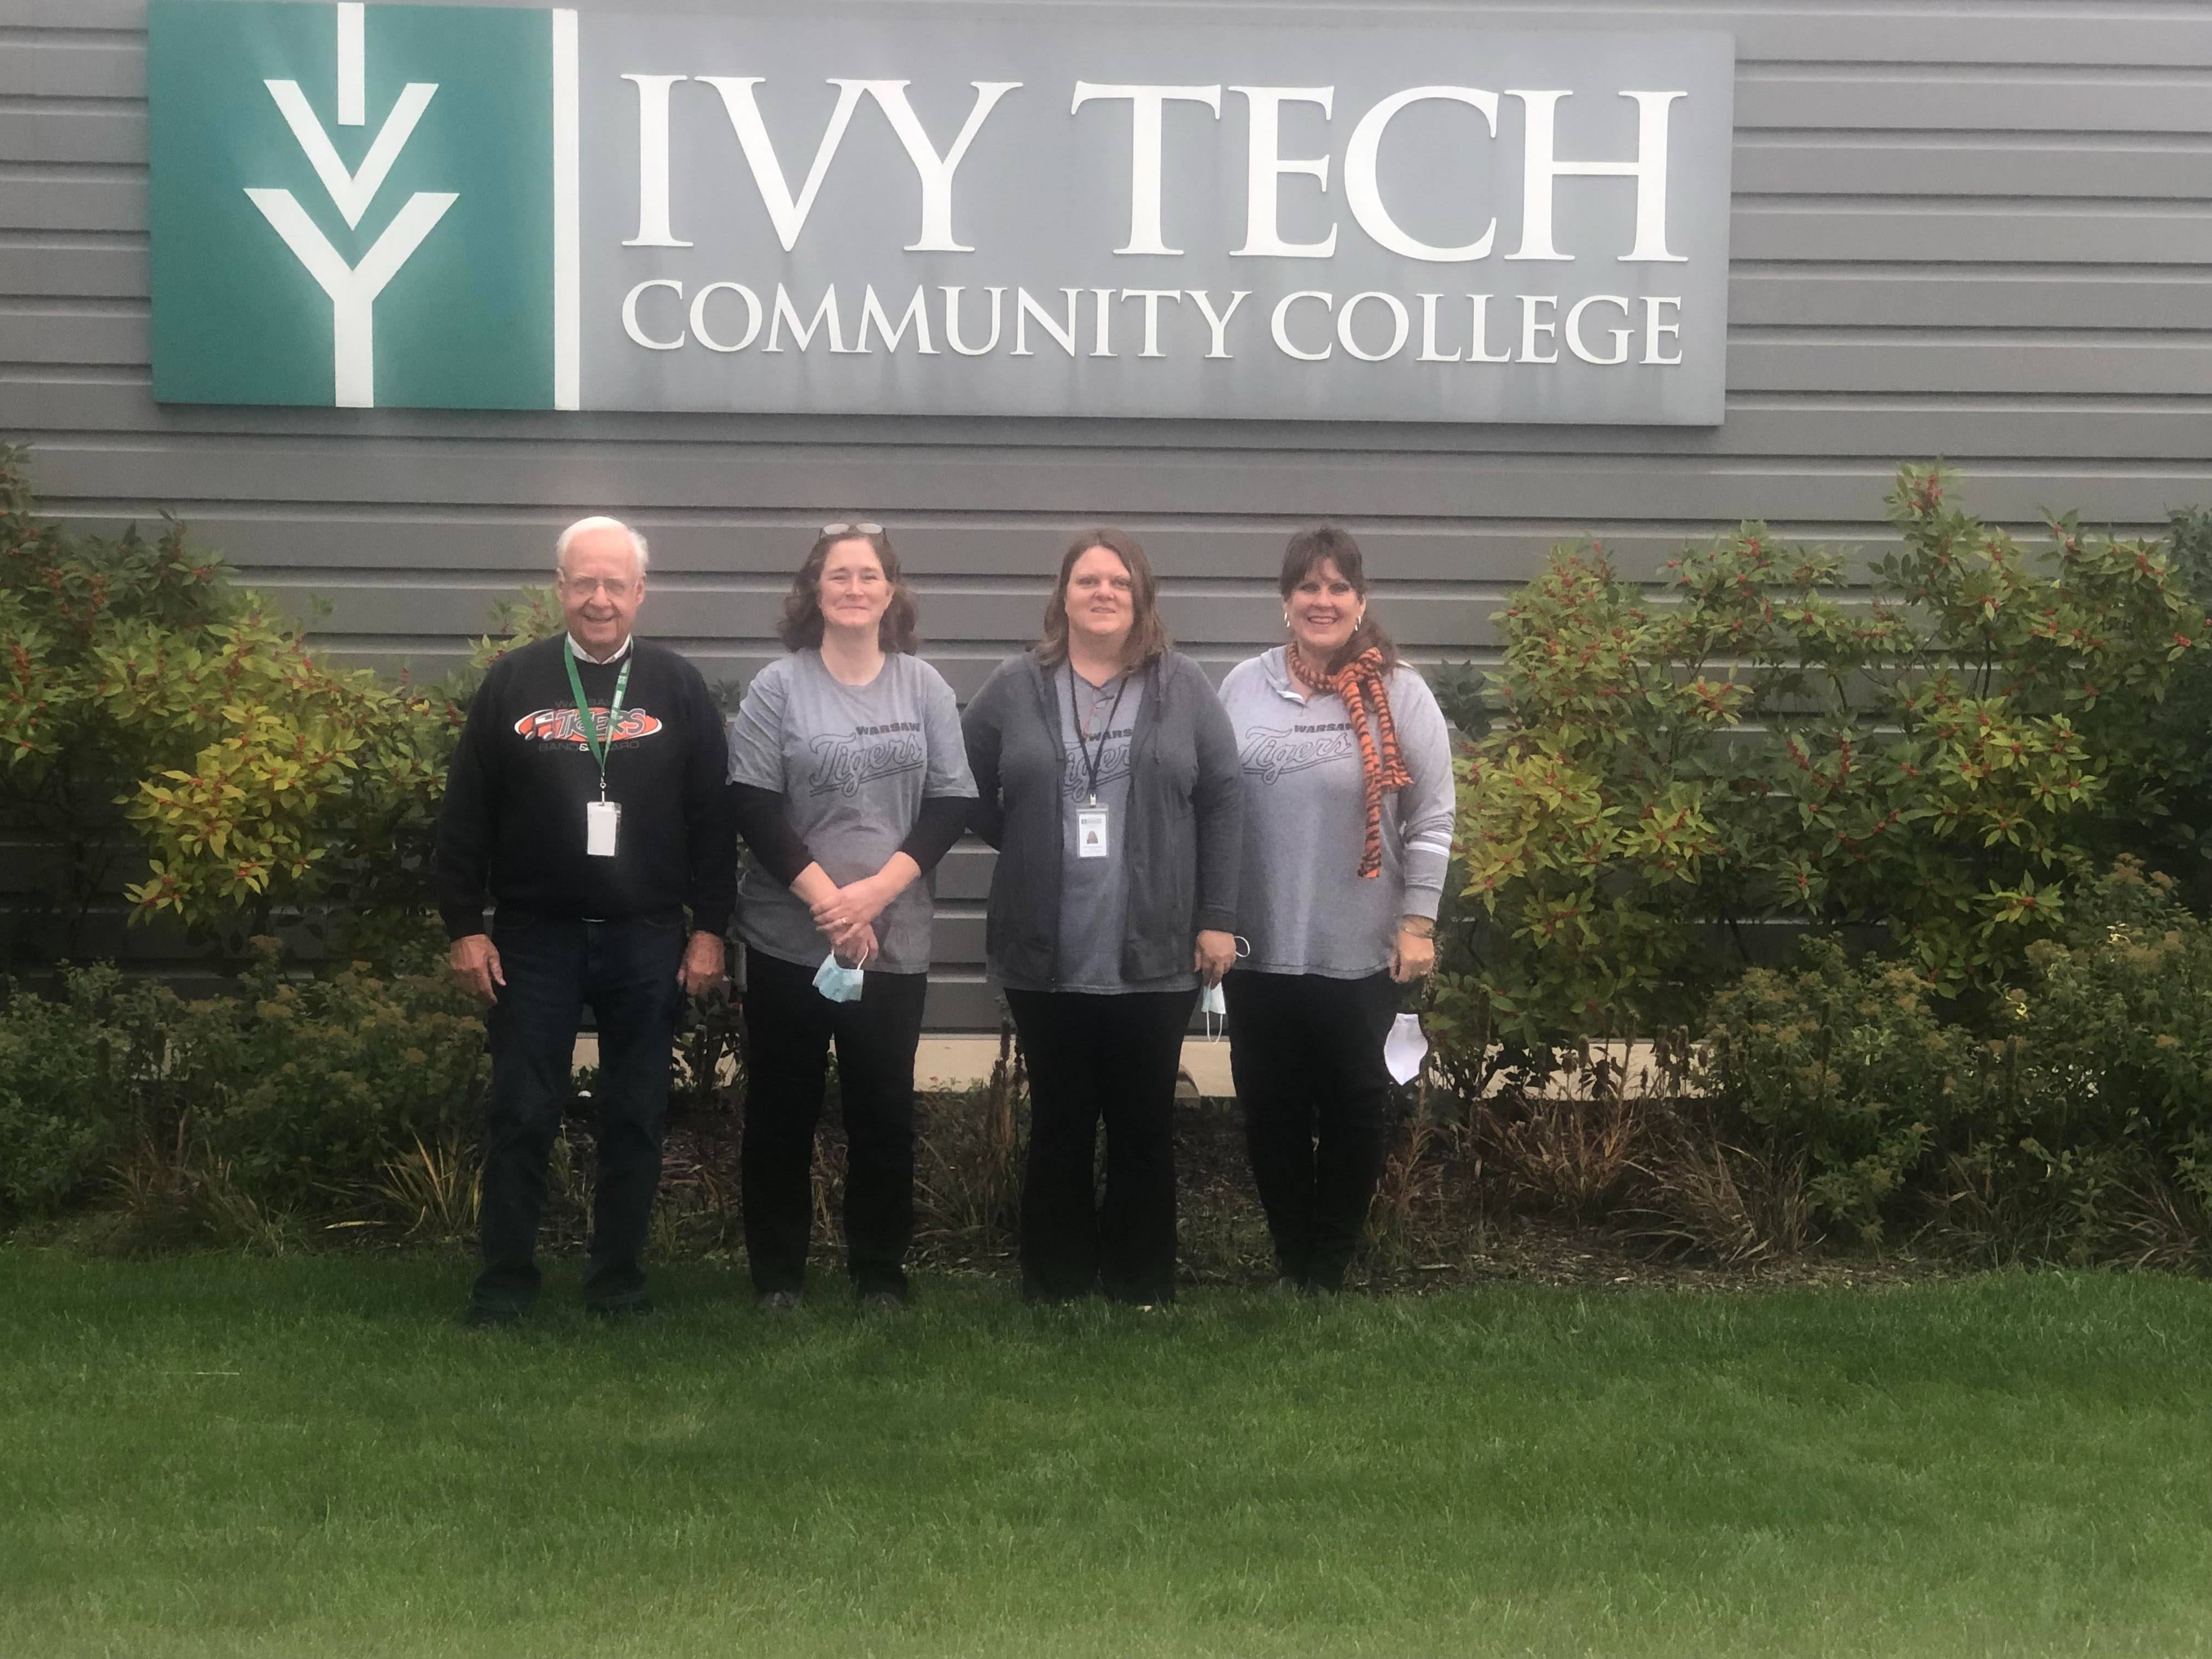 Warsaw adult education team posing below ivy tech community college exterior sign